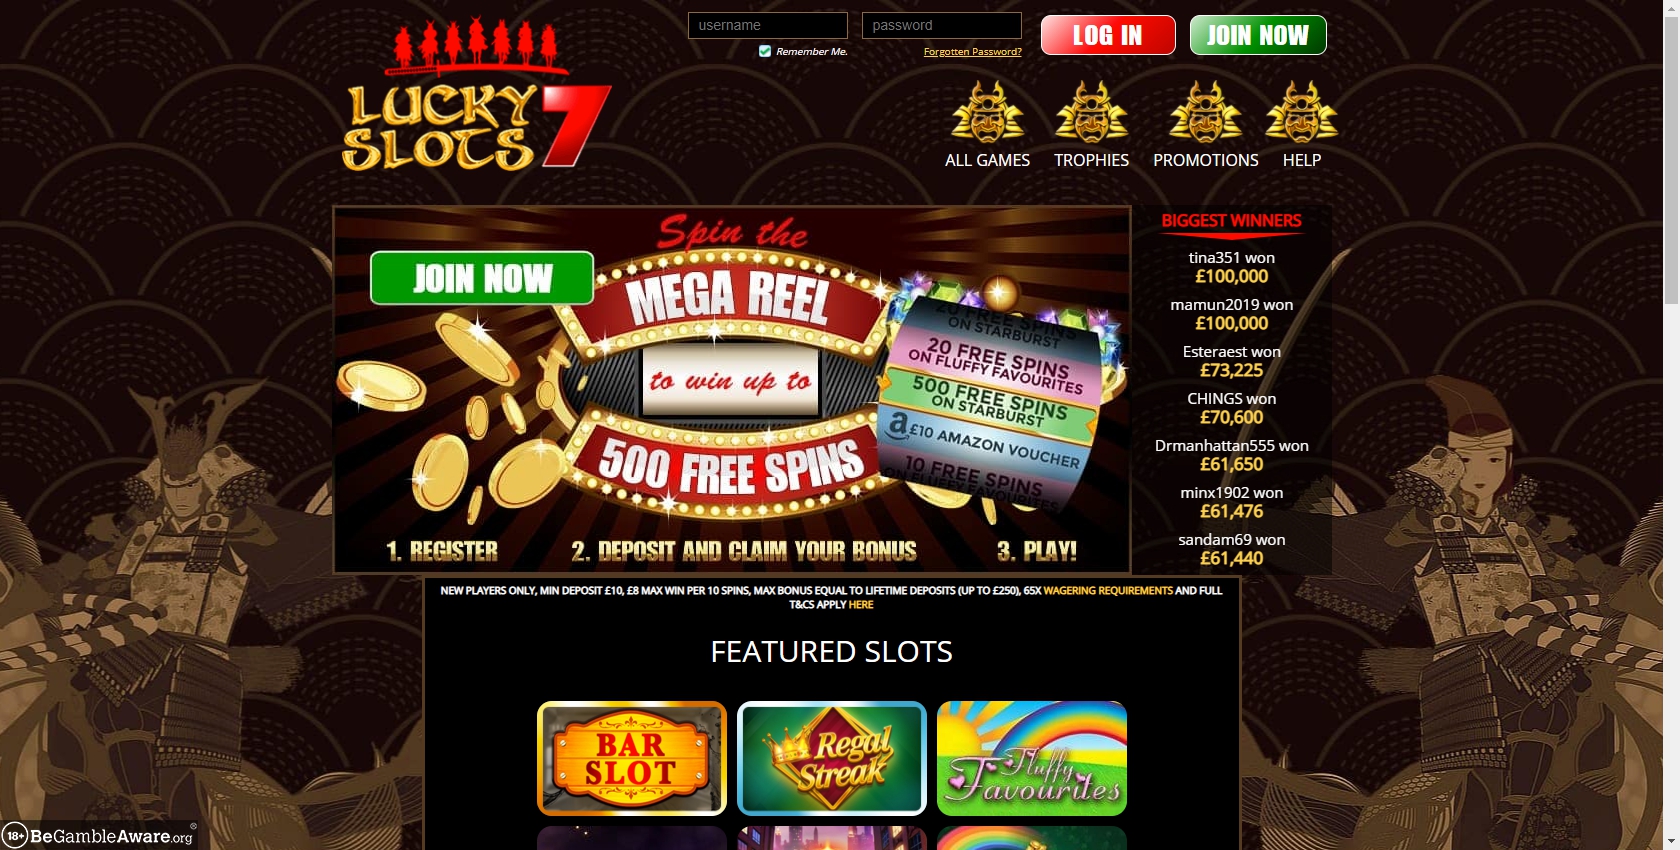 Lucky Slots 7 Casino Review